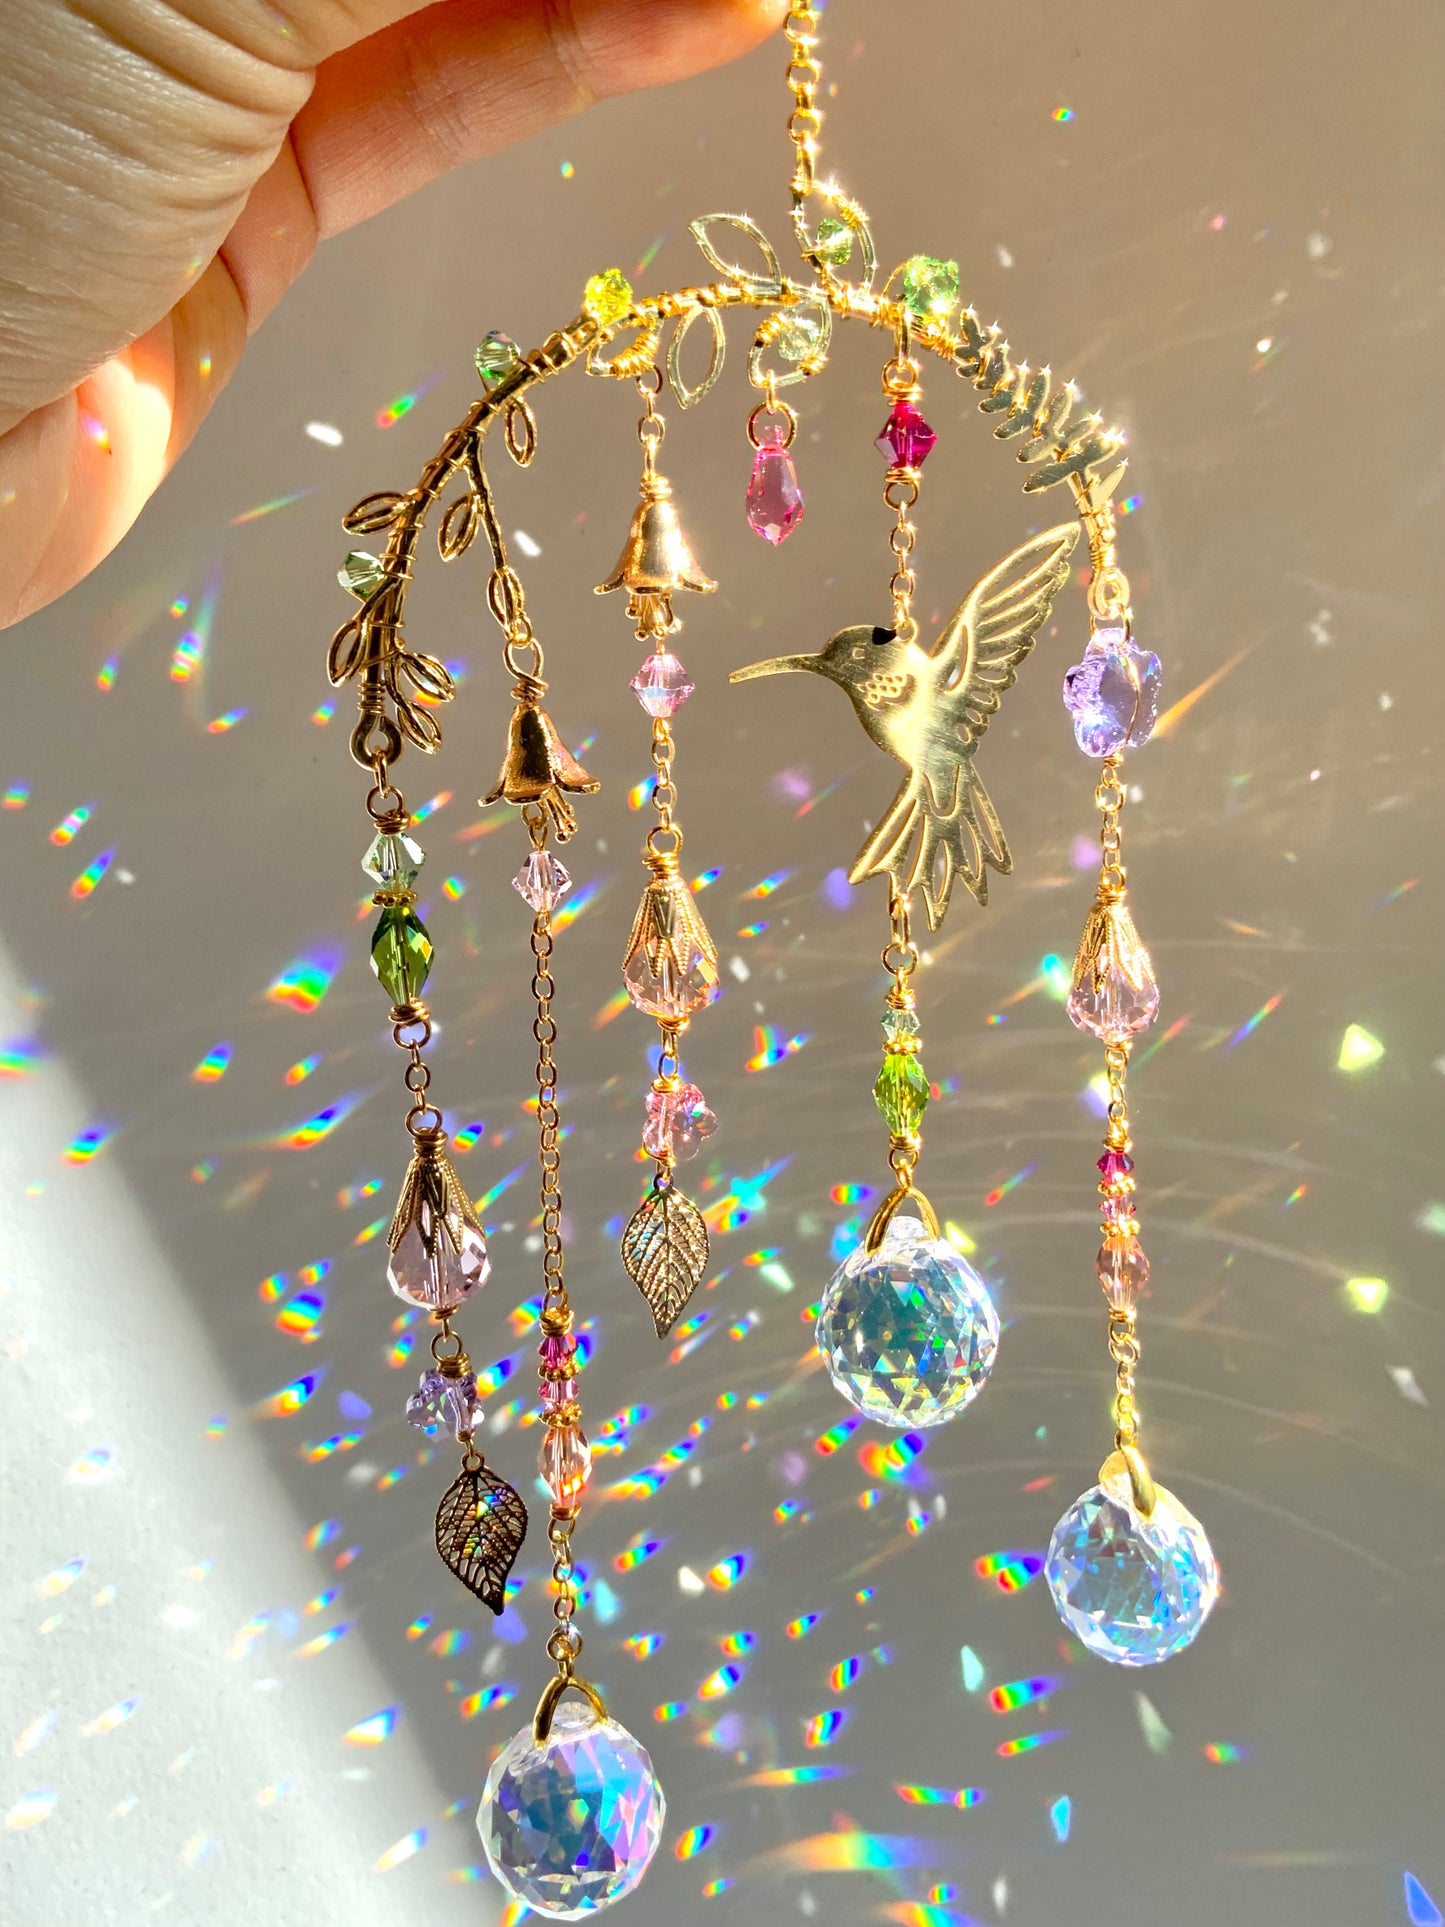 Small Crystal Hummingbird Mobile ~ 18k Gold-plated, Stainless Steel, ombré prisms Suncatcher